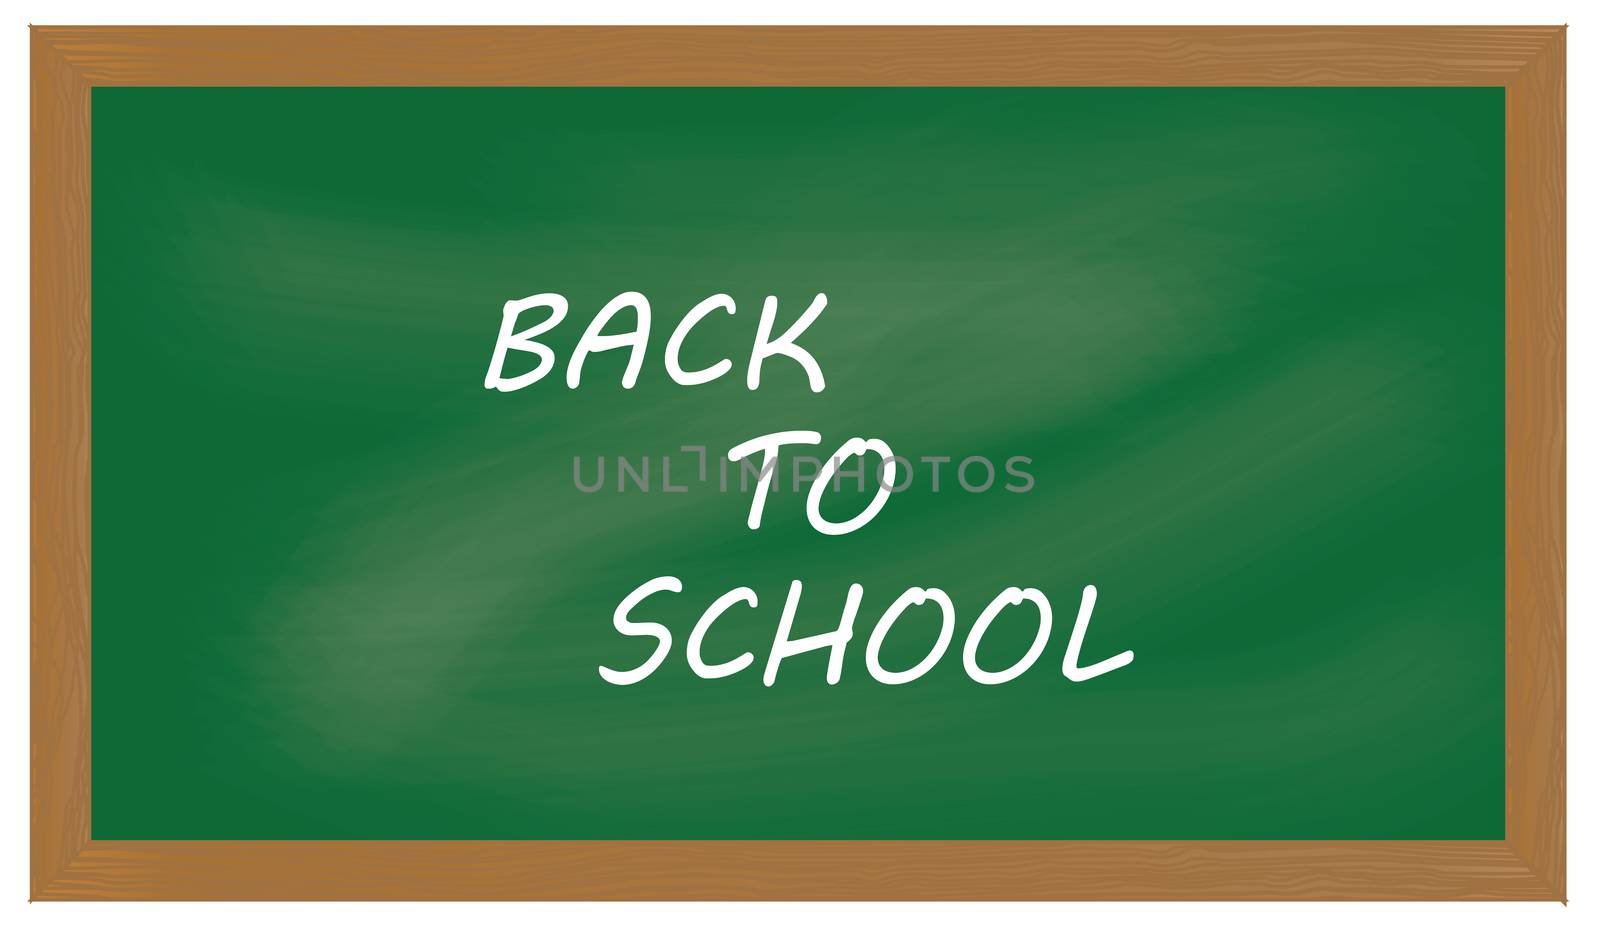 Green chalkboard background  illustration with sign back to school